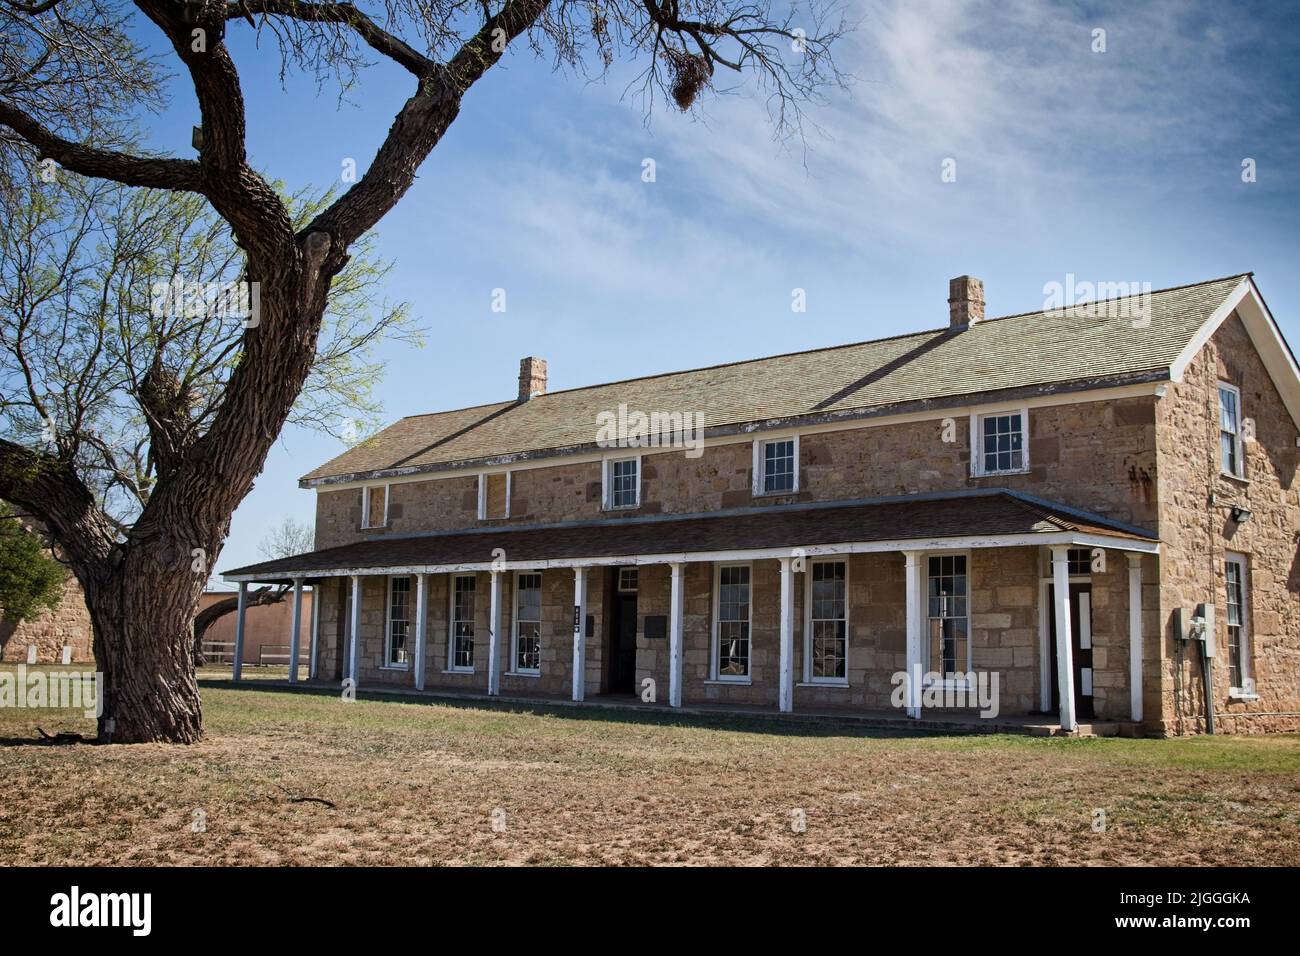 Christmas at Old Fort Concho – Fort Concho